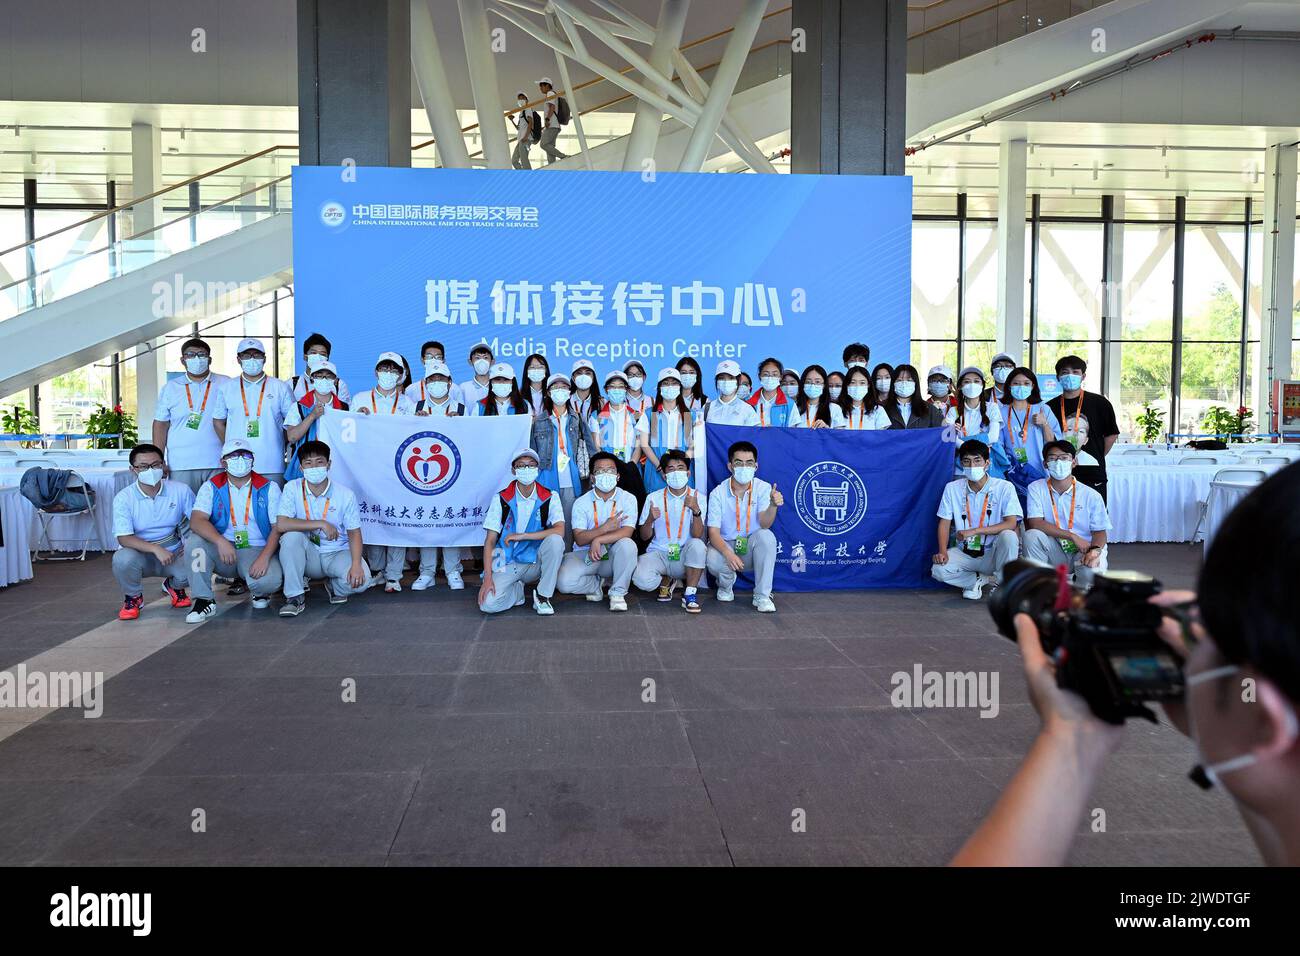 (220905) -- BEIJING, Sept. 5, 2022 (Xinhua) -- Volunteers pose for a group photo at the media reception center of  the Shougang Park during the 2022 China International Fair for Trade in Services (CIFTIS) in Beijing, capital of China, Sept. 5, 2022. The 2022 CIFTIS closed on Monday. (Xinhua/Li Xin) Stock Photo